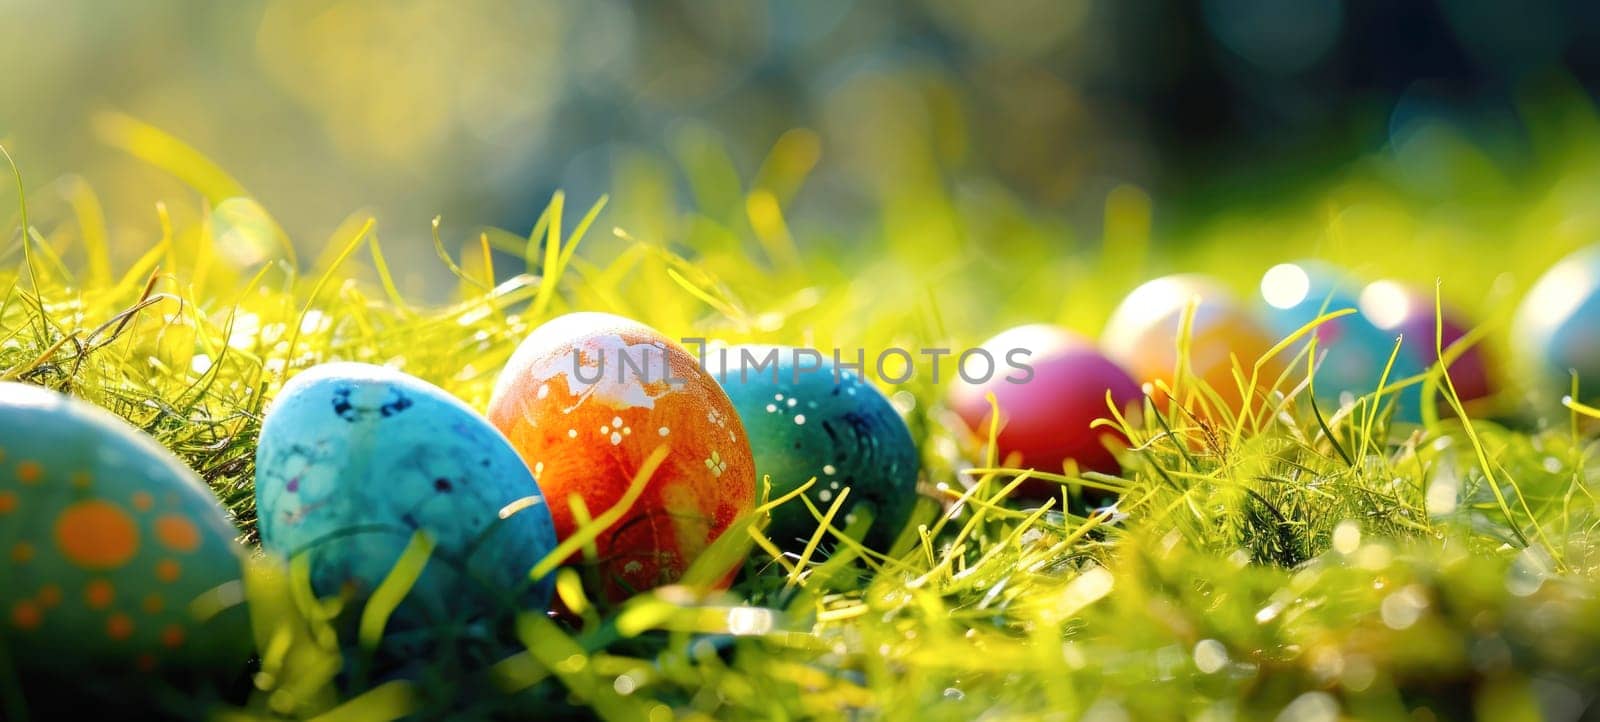 Dew-kissed Easter eggs displaying a variety of colors and patterns rest gently within the bright, sunlit blades of fresh morning grass.